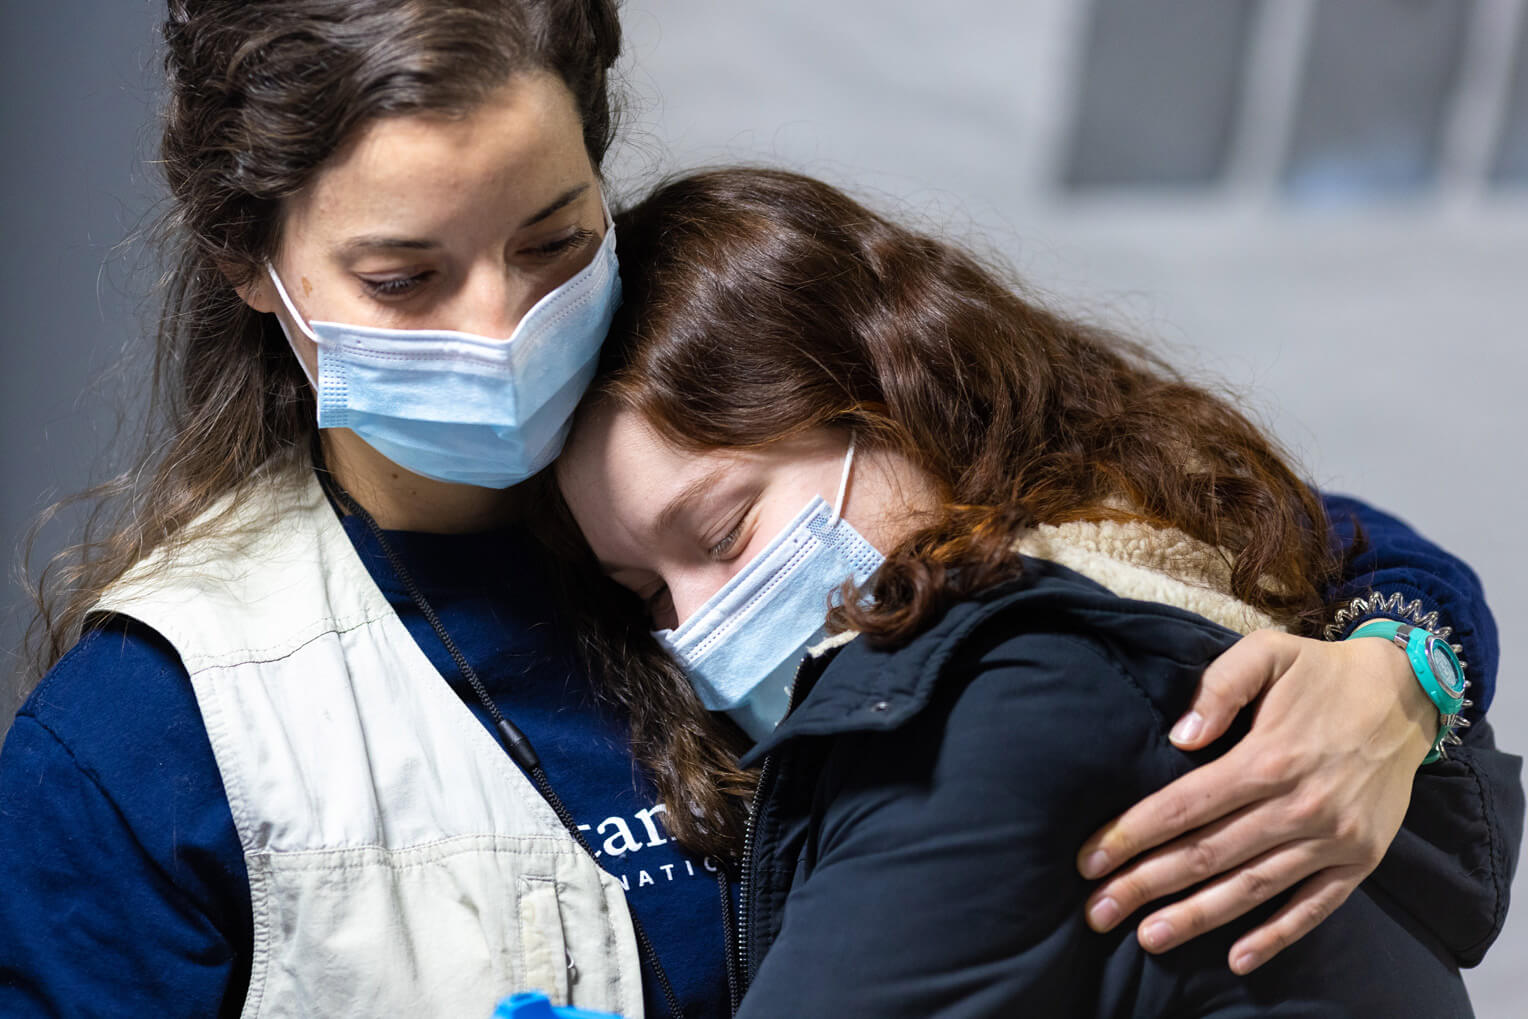 Ukrainians are facing many fears and dangers and are grateful for the kindness of our medical teams--there to treat illness and to share the love of Jesus Christ.